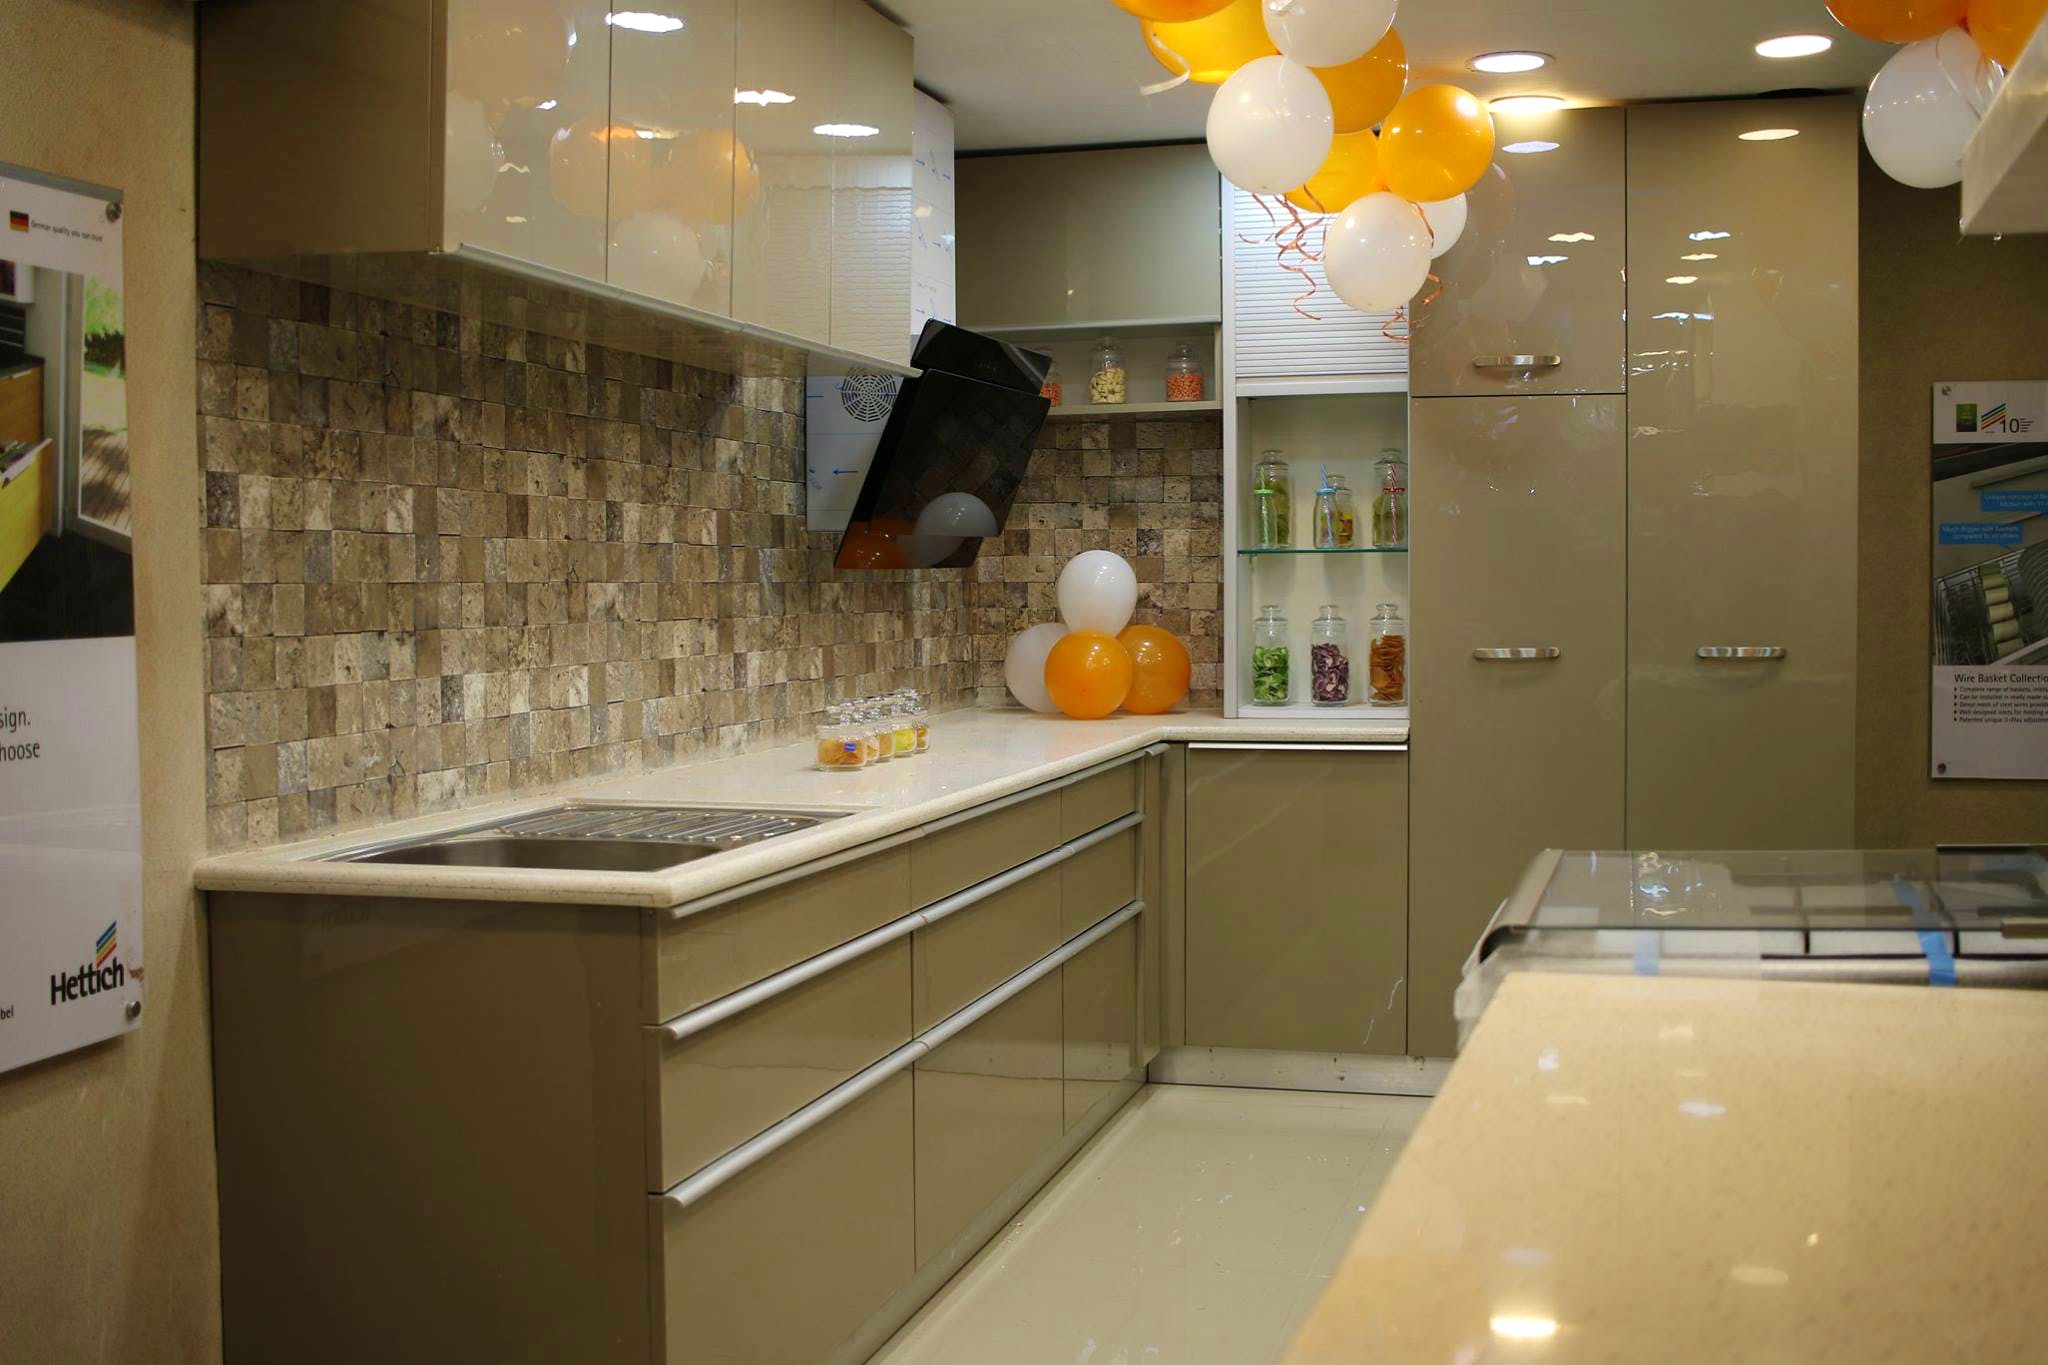 Countertop,Room,Property,Cabinetry,Interior design,Ceiling,Yellow,Kitchen,Orange,Furniture